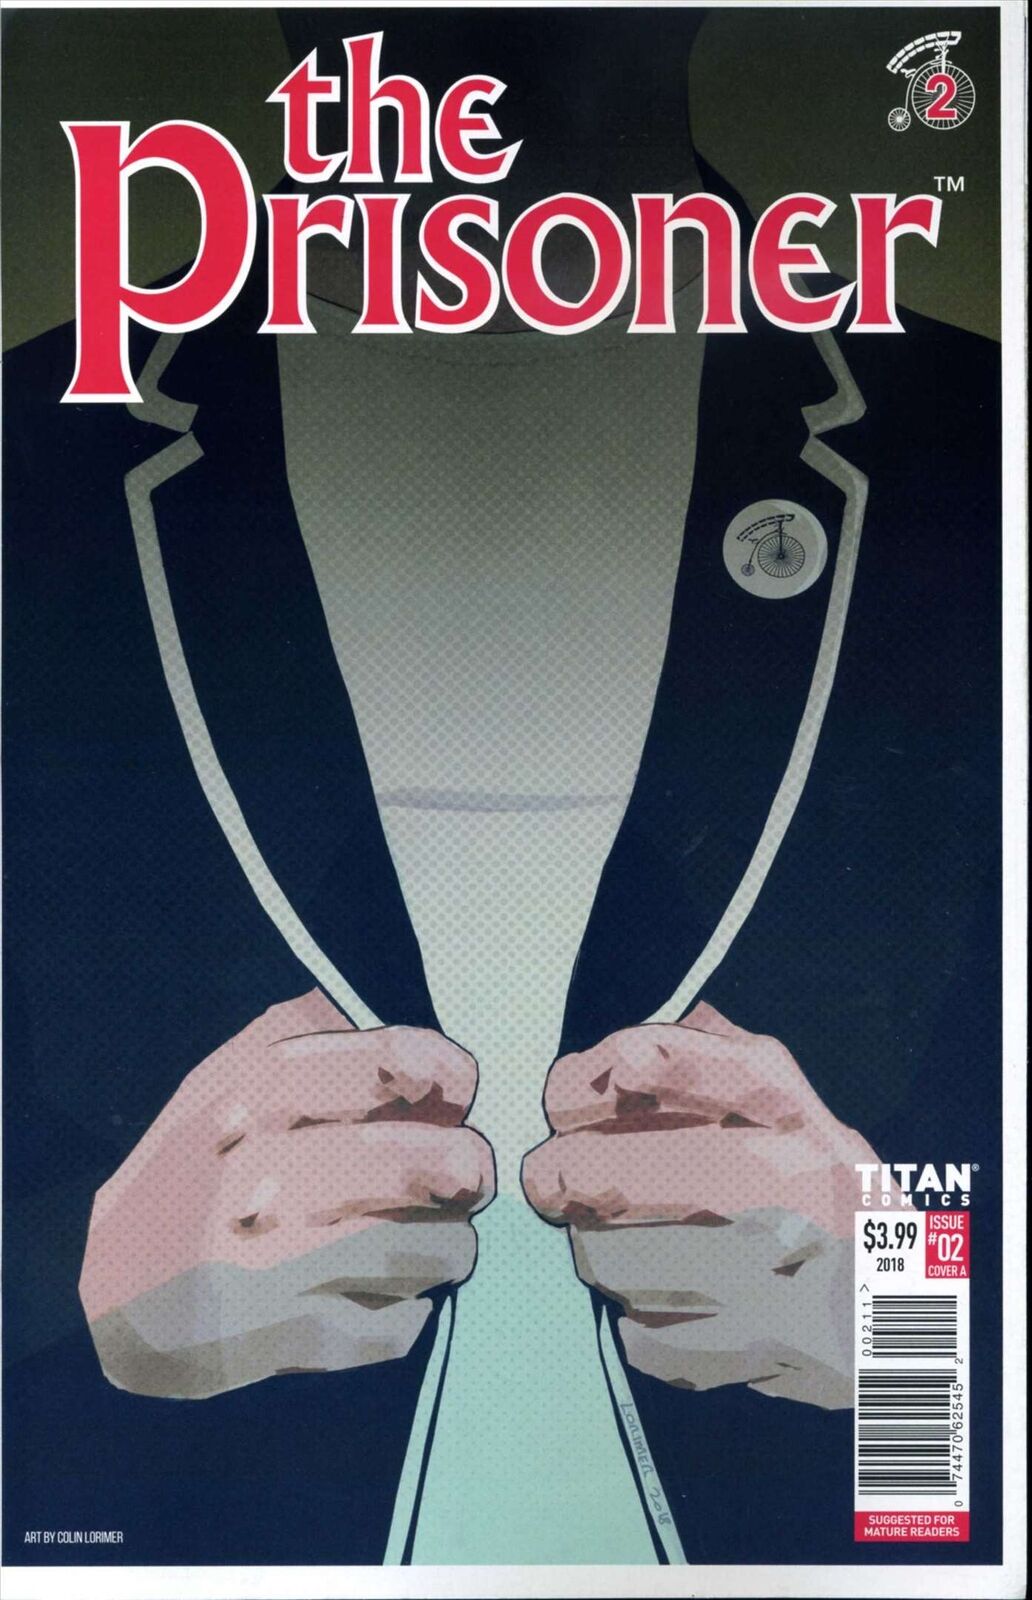 Prisoner, The: The Uncertainty Machine #2A VF/NM; Titan | Based on TV Show - we